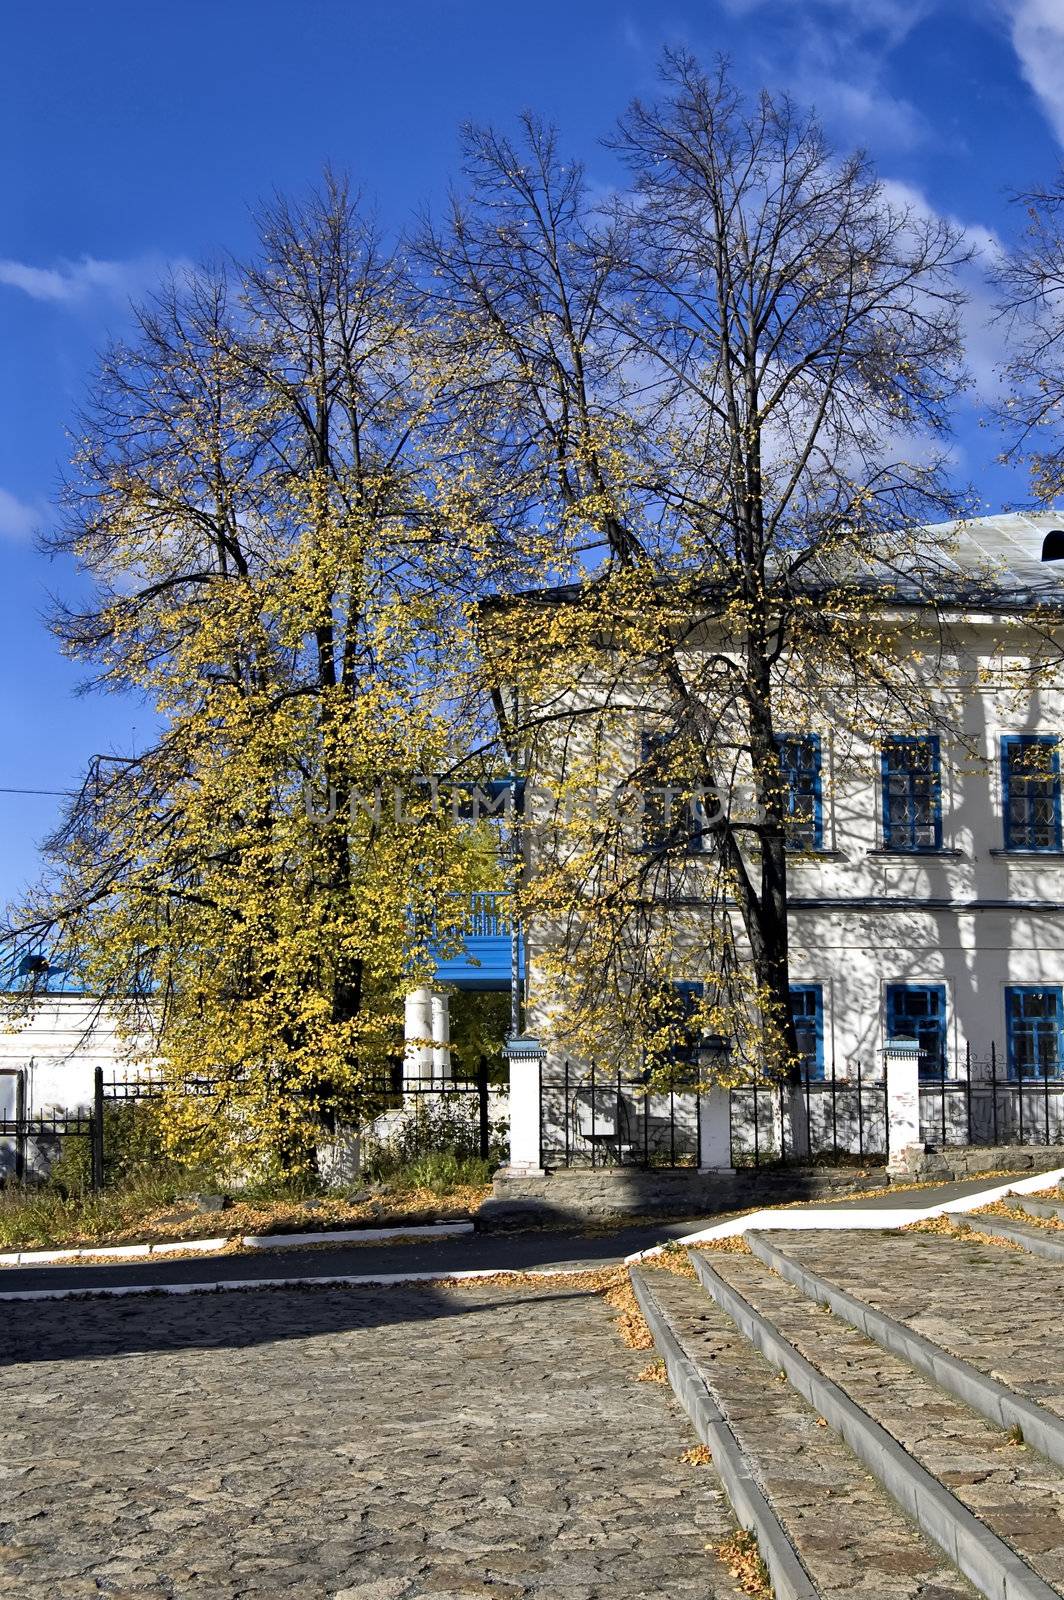 The angle of the white building with blue windows and roof, yellow leaves on the tree and the ladder against the blue sky and white clouds